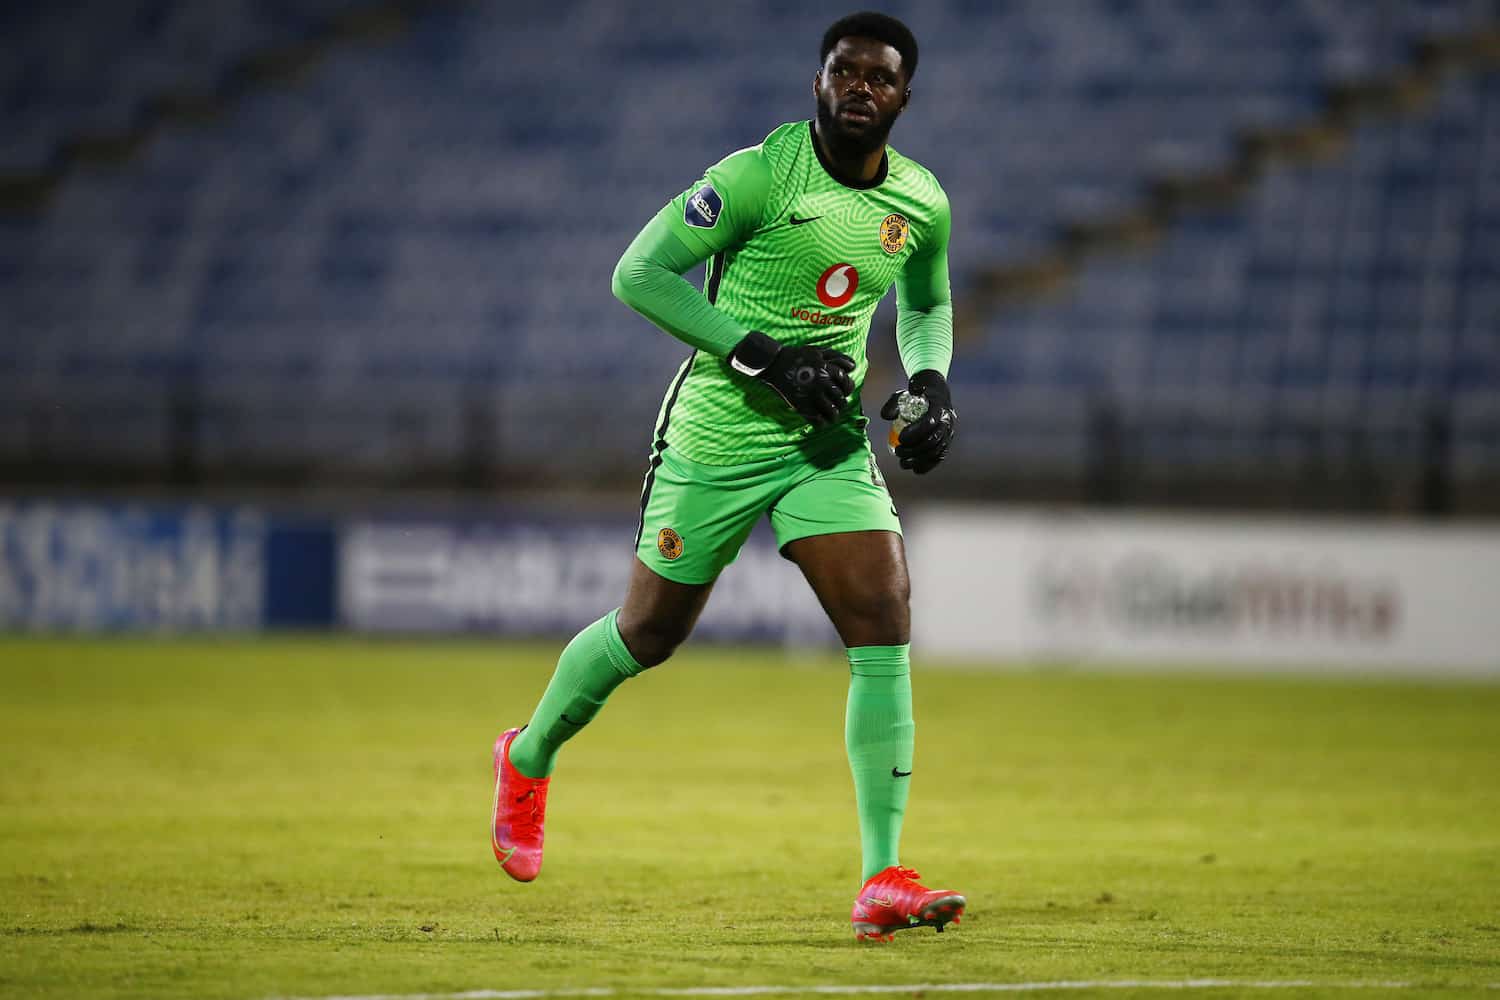 Kaizer Chiefs offer Akpeyi new contract